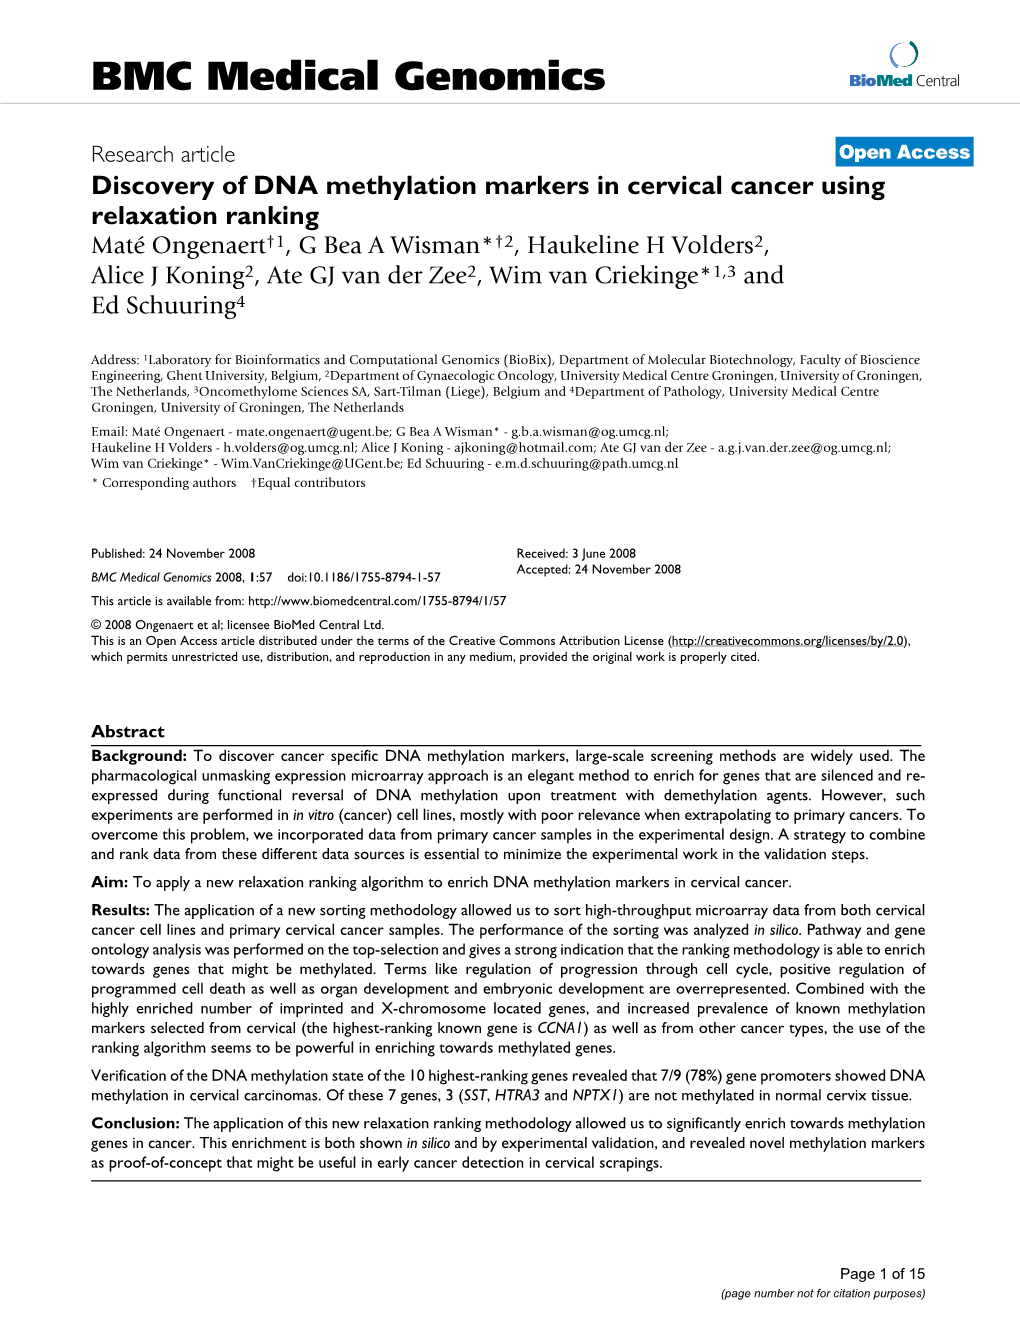 Discovery of DNA Methylation Markers in Cervical Cancer Using Relaxation